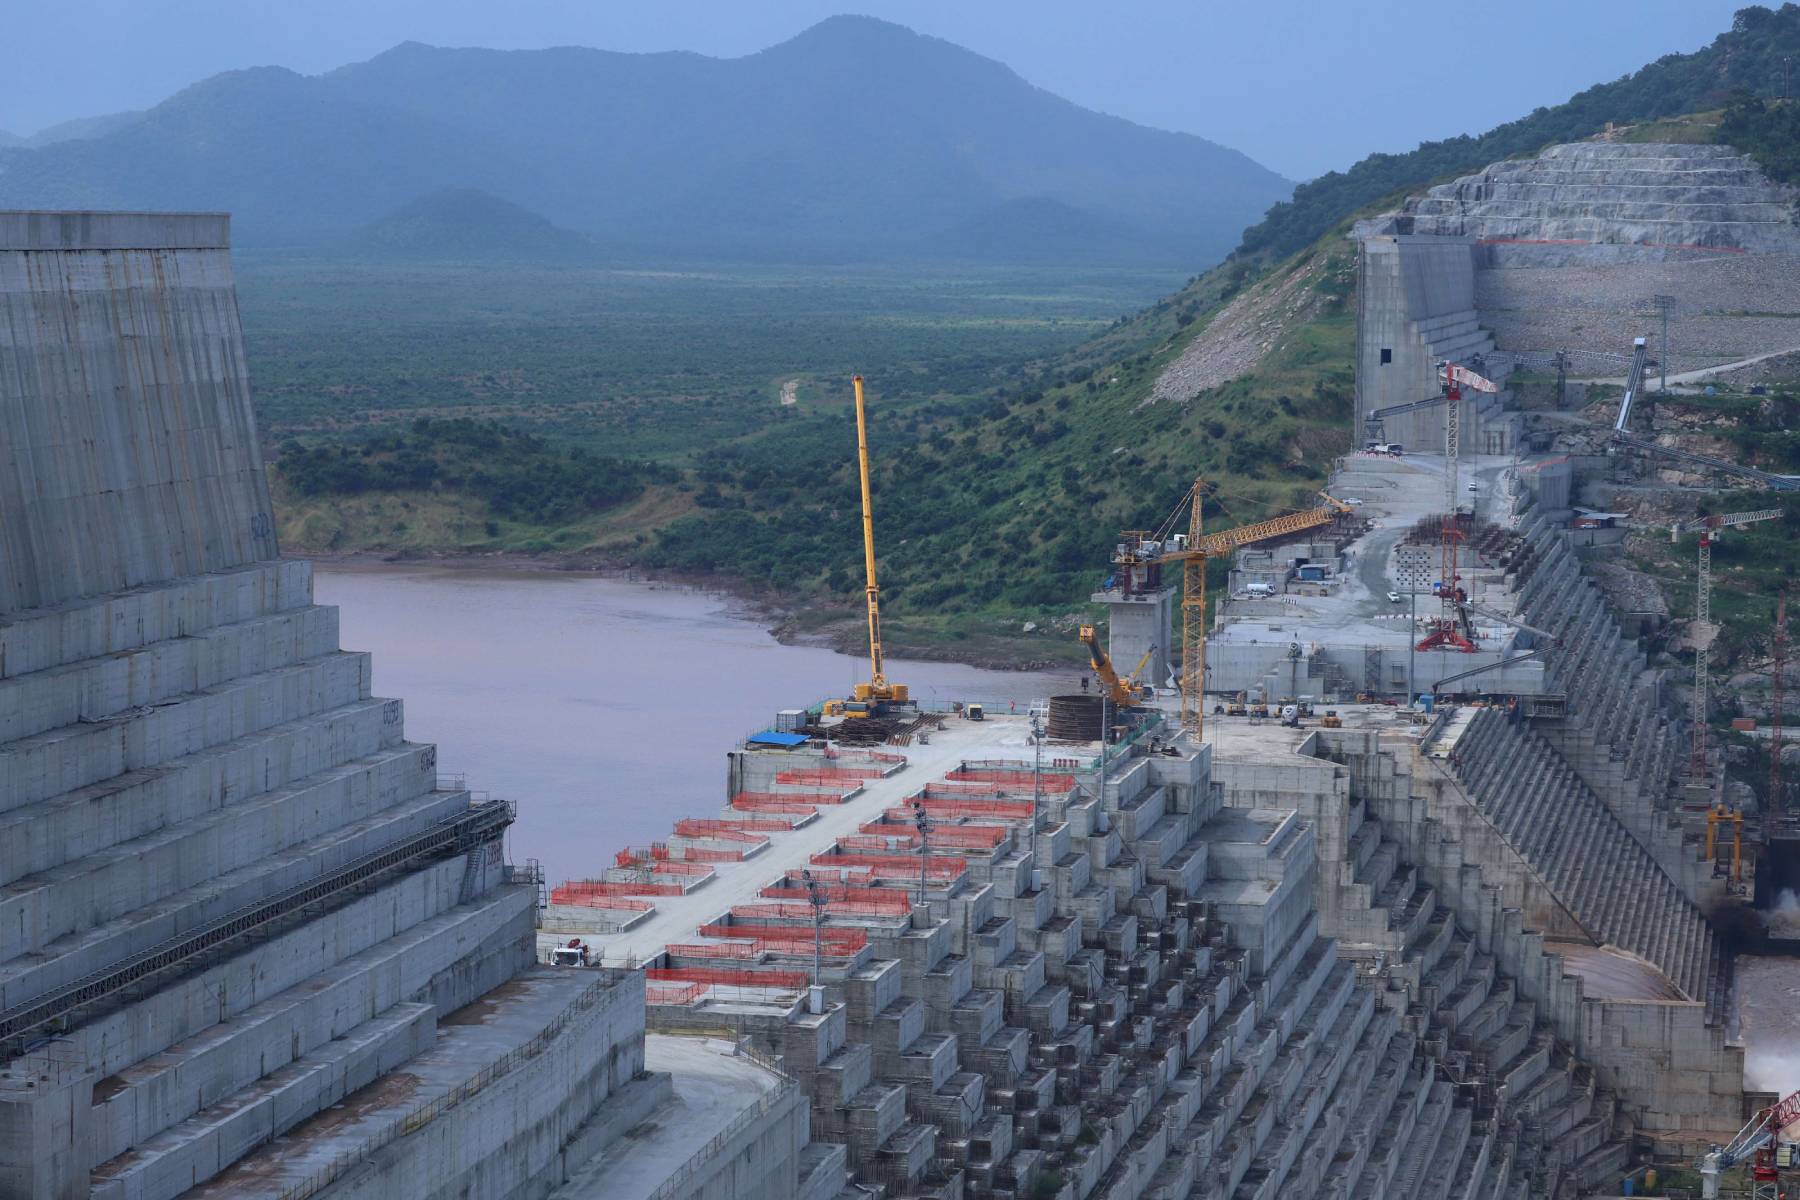 The reservoir has a capacity of 74 billion cubic metres